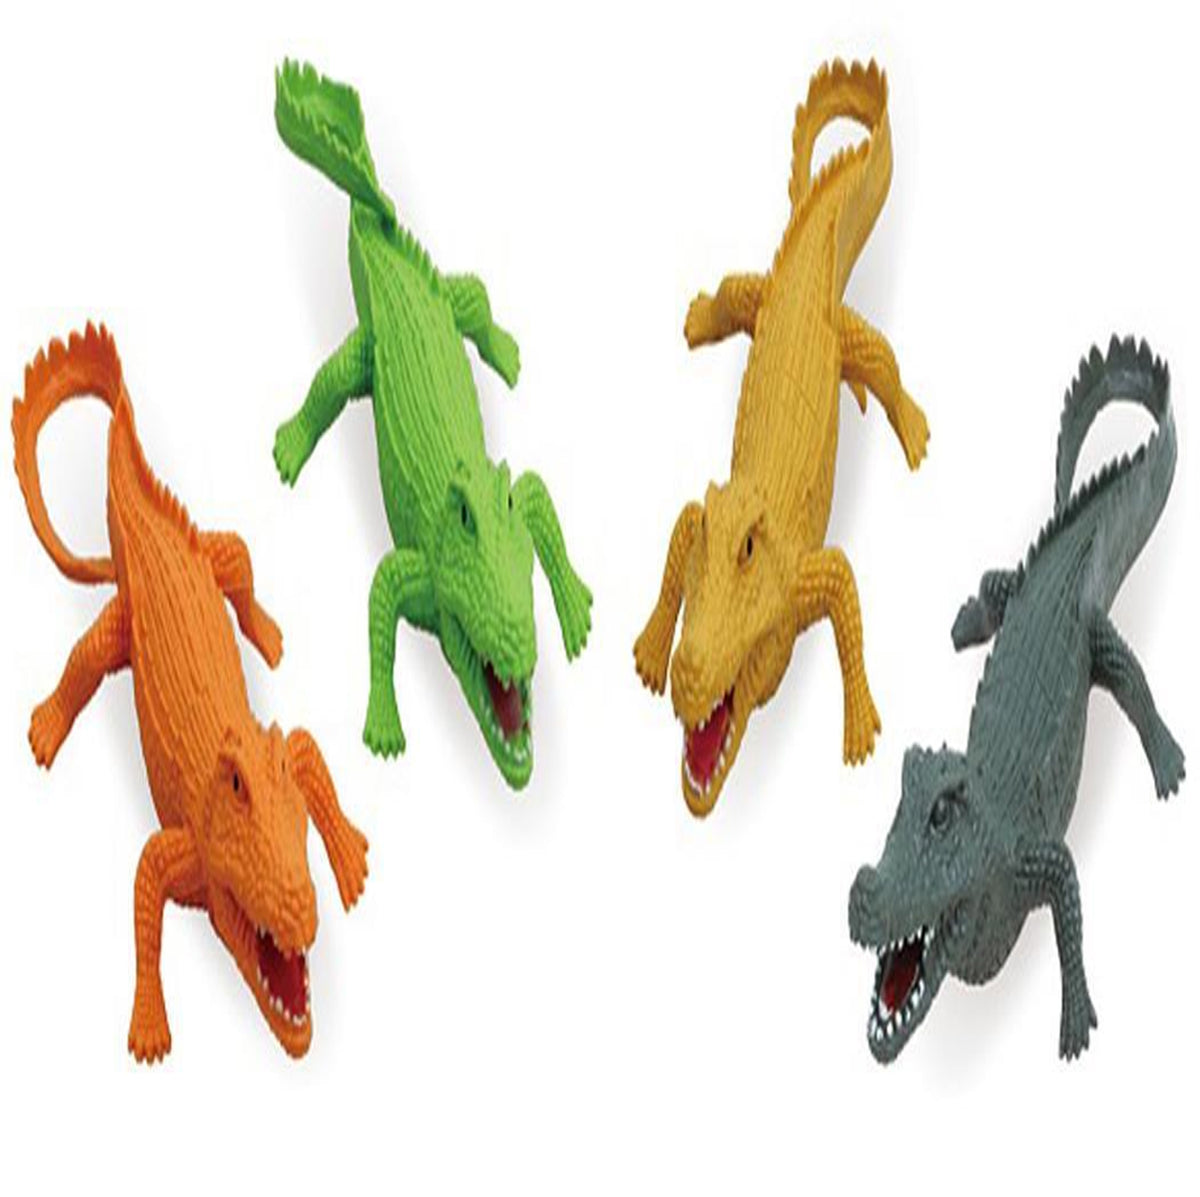 Wholesale 9-Inch Rubber Crocodile Toy Pack of Assorted Colors | Assorted Colorful Crocodile Toys (sold by the pack of 4 asst gators )